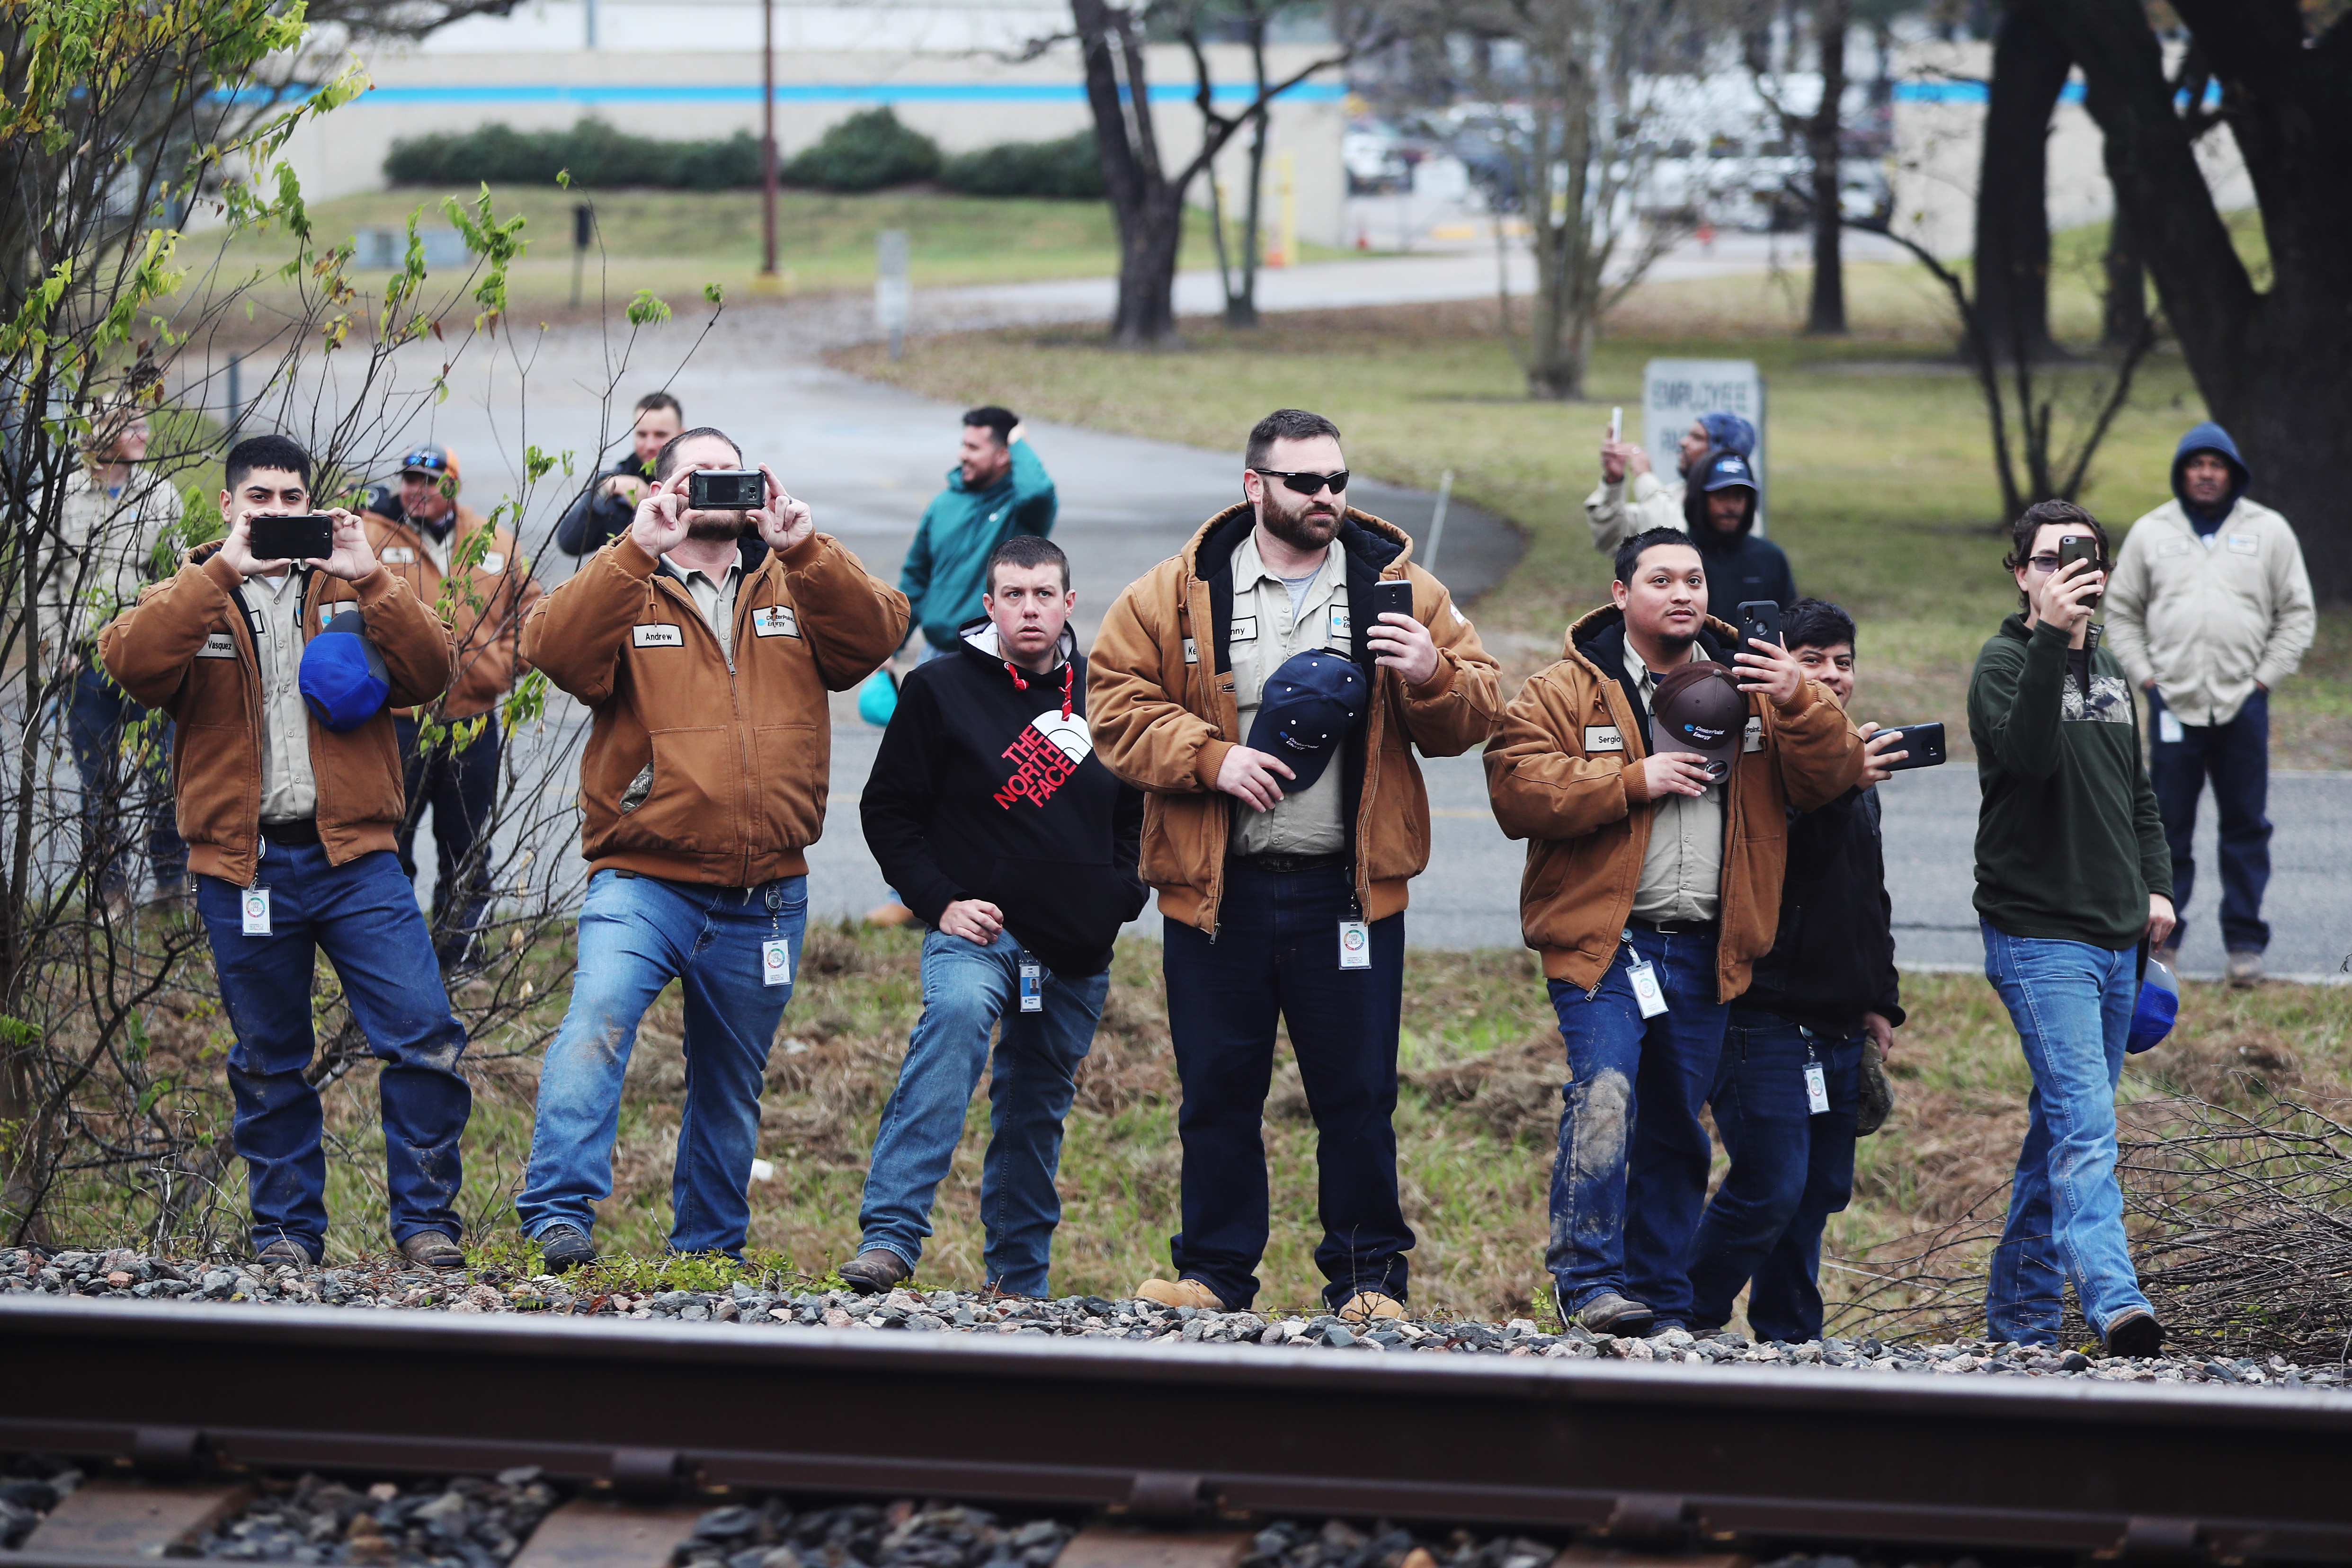 Members of the public line the route to pay their respects as the train carrying former President George H.W. Bush to his final resting place passes by on December 6, 2018 in Texas. (Photo by Joe Raedle/Getty Images)